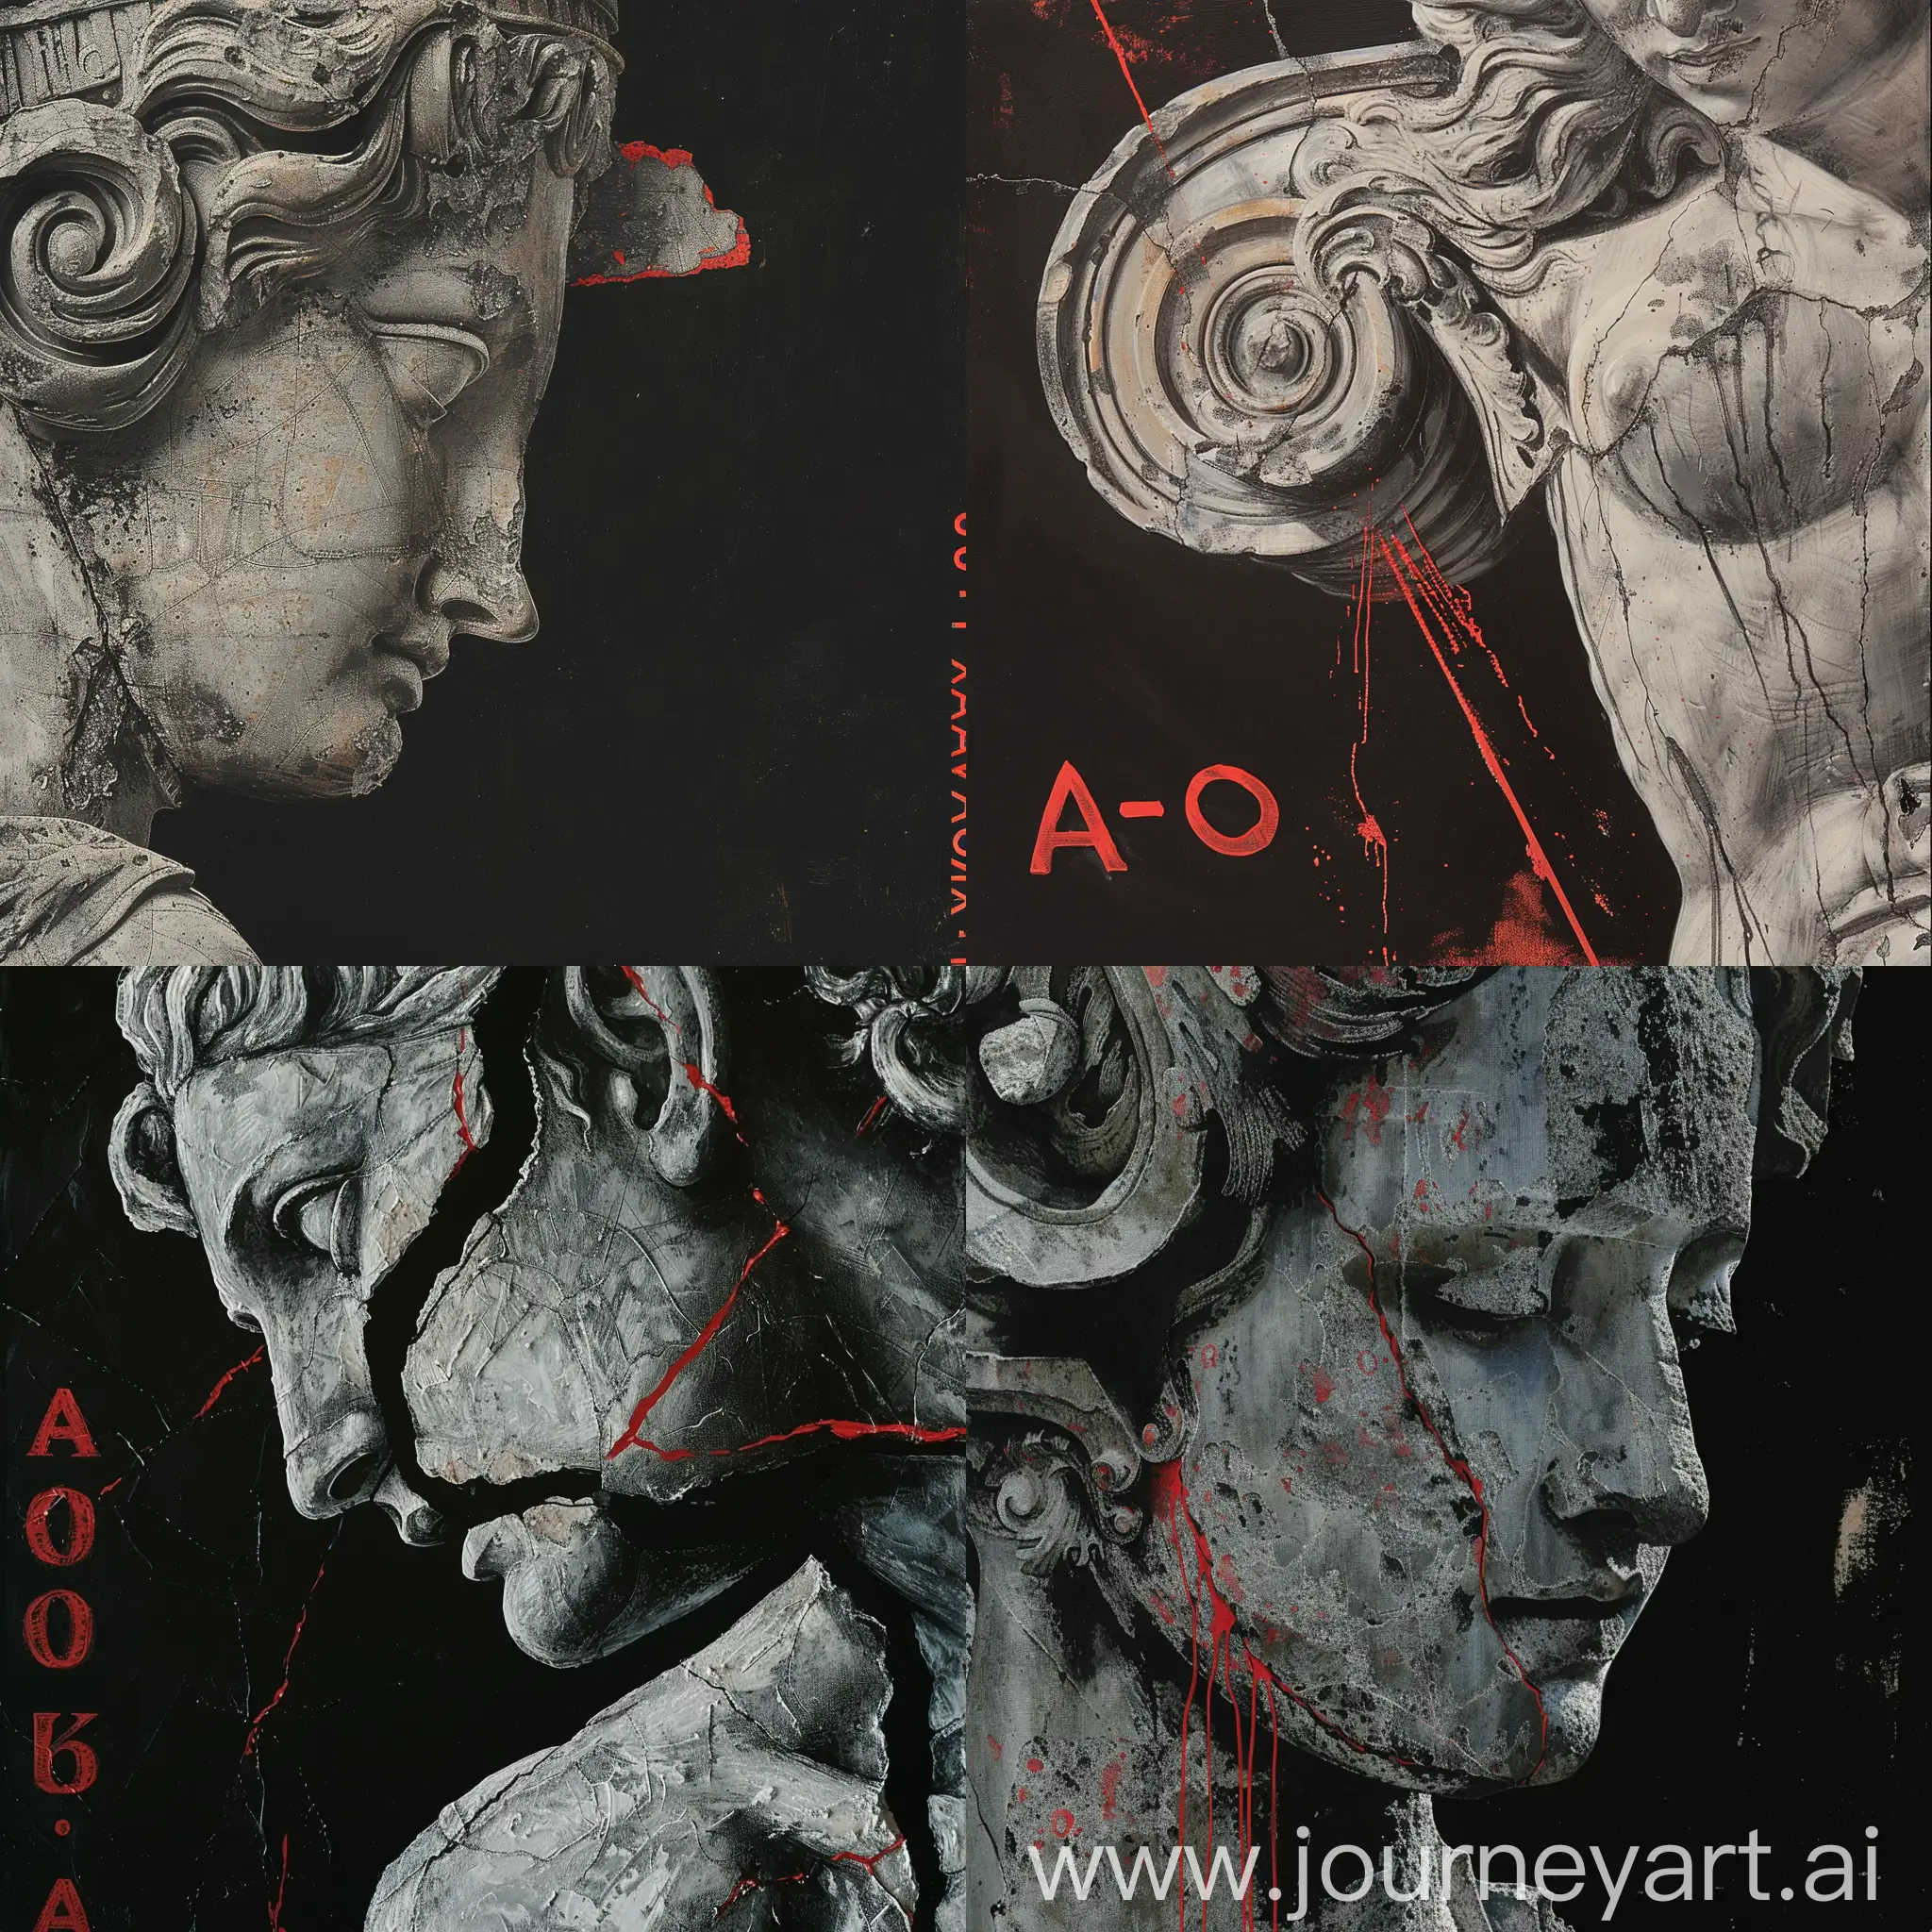 Renaissance-Stone-Sculpture-Female-Torso-and-Face-CloseUp-with-Red-Accents